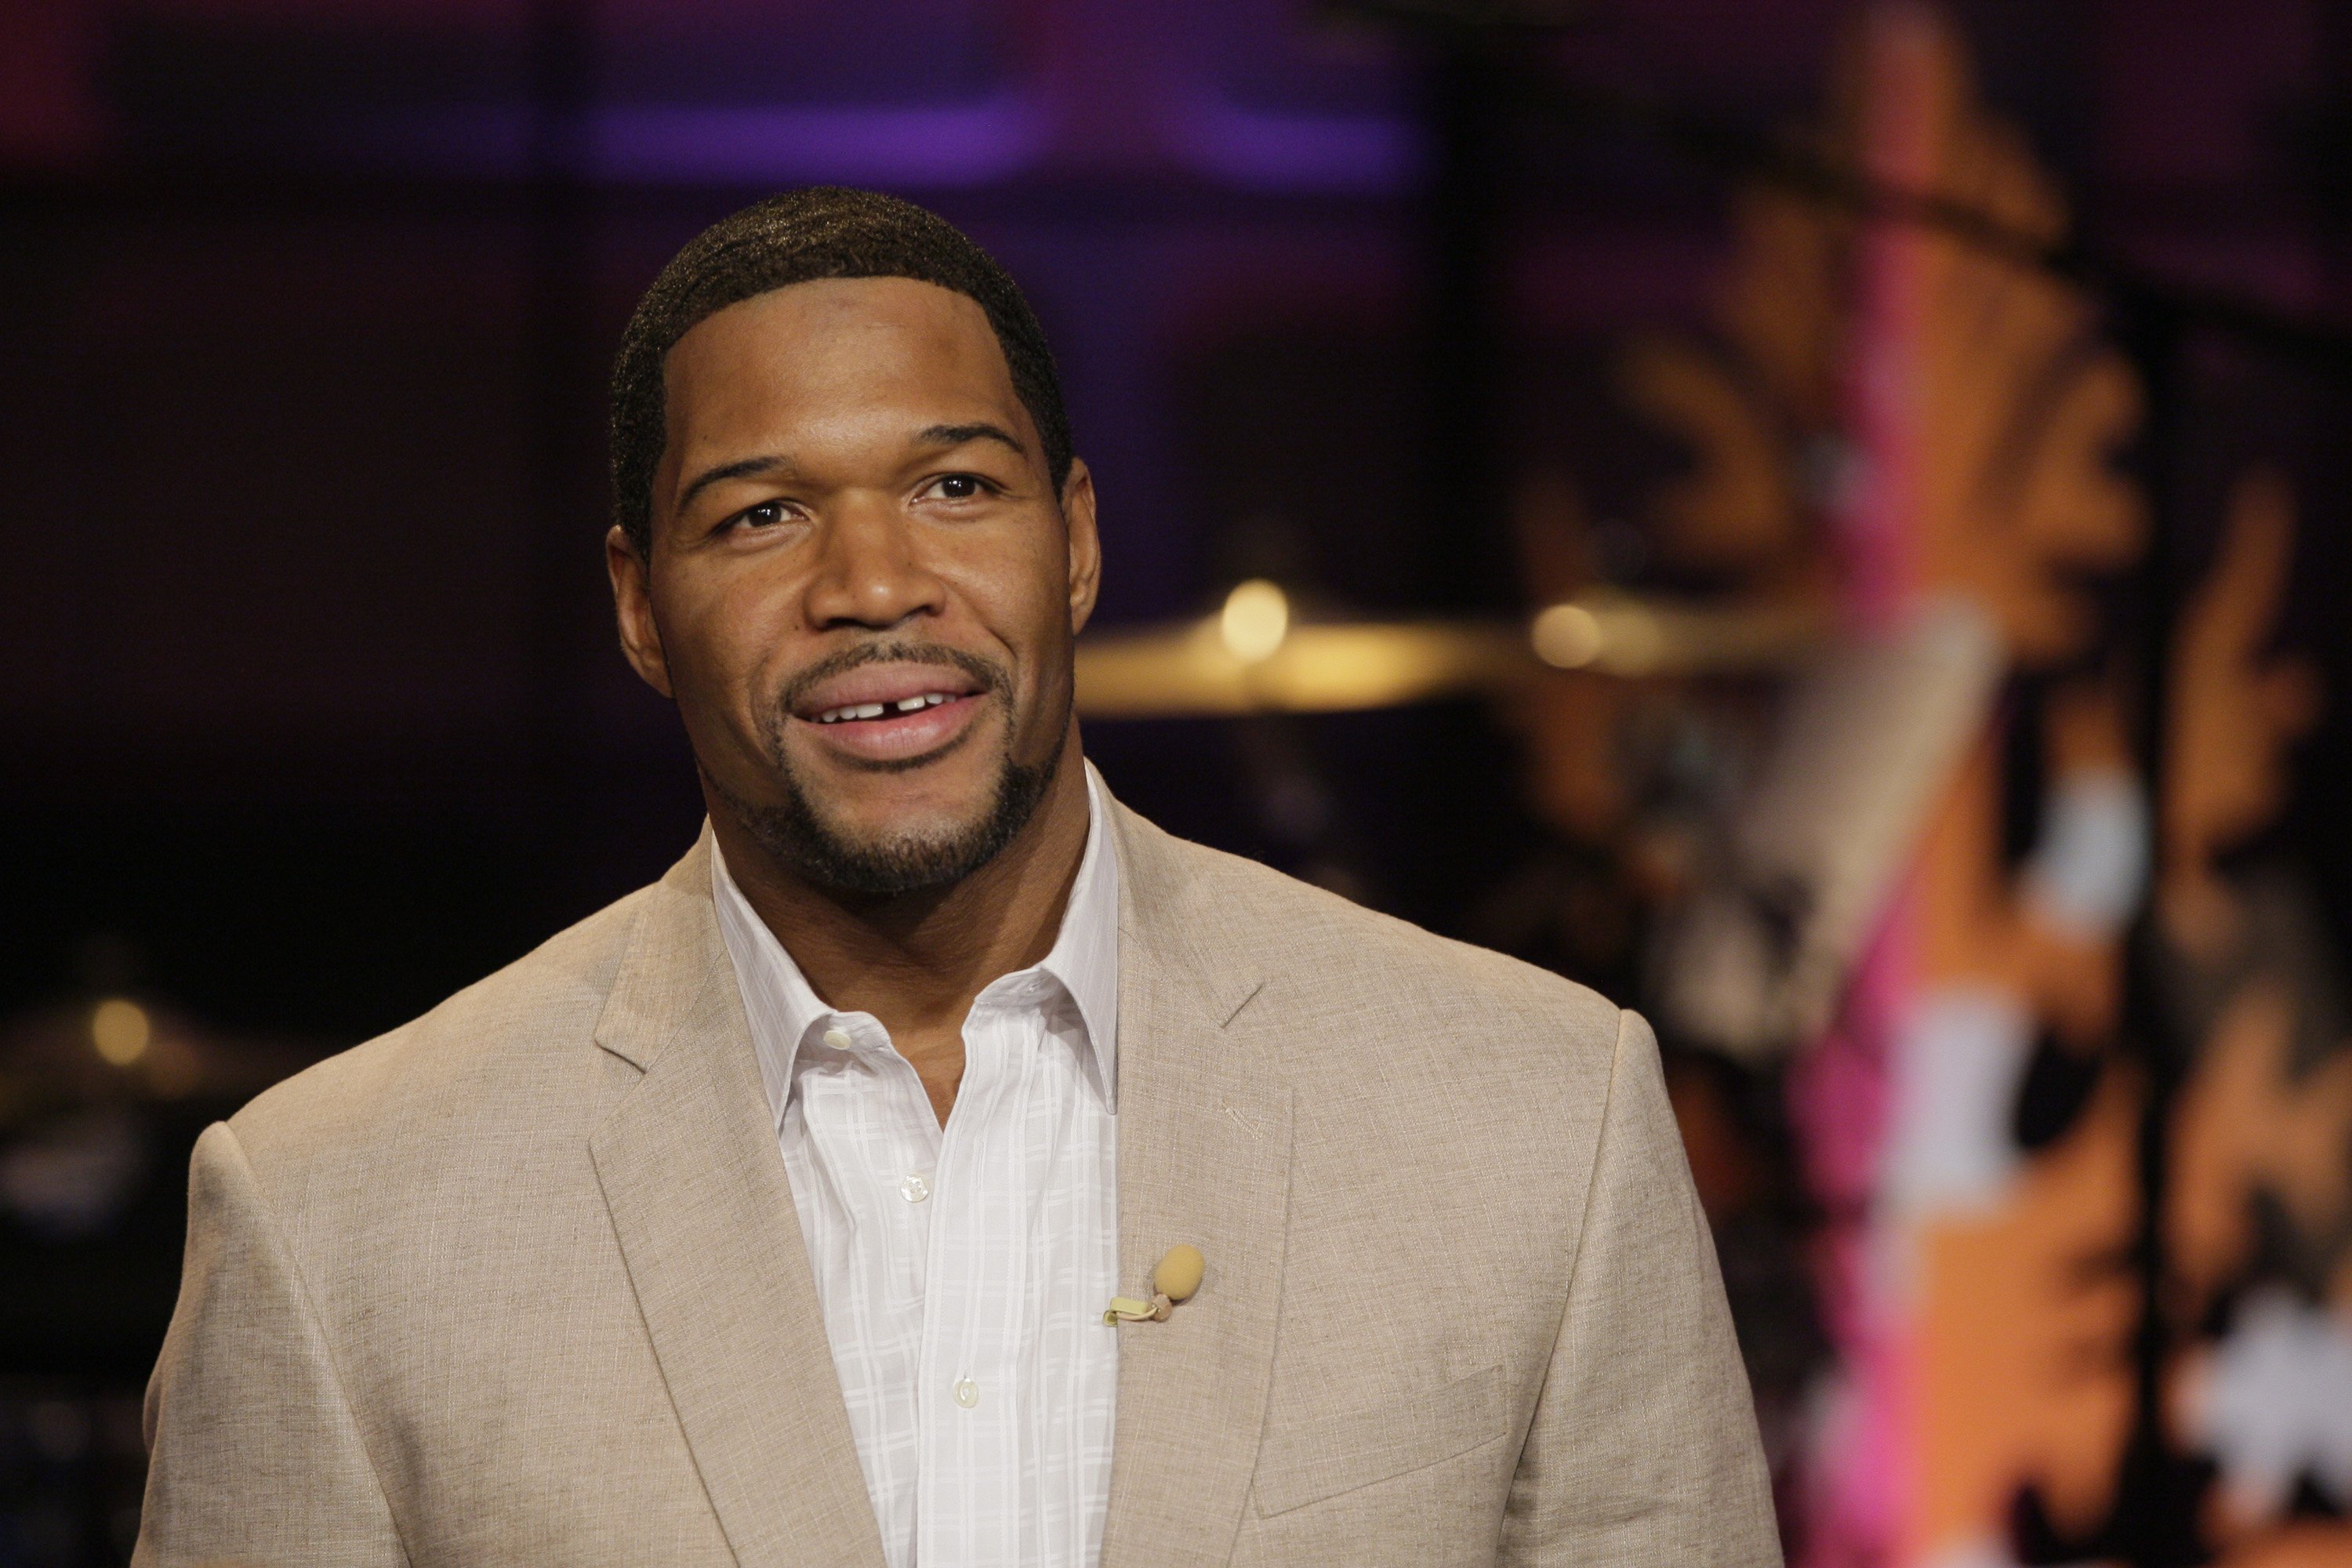 Former football player Michael Strahan on "The Tonight Show with Jay Leno" Season 22 in December 20, 2013 | Source: Getty Images